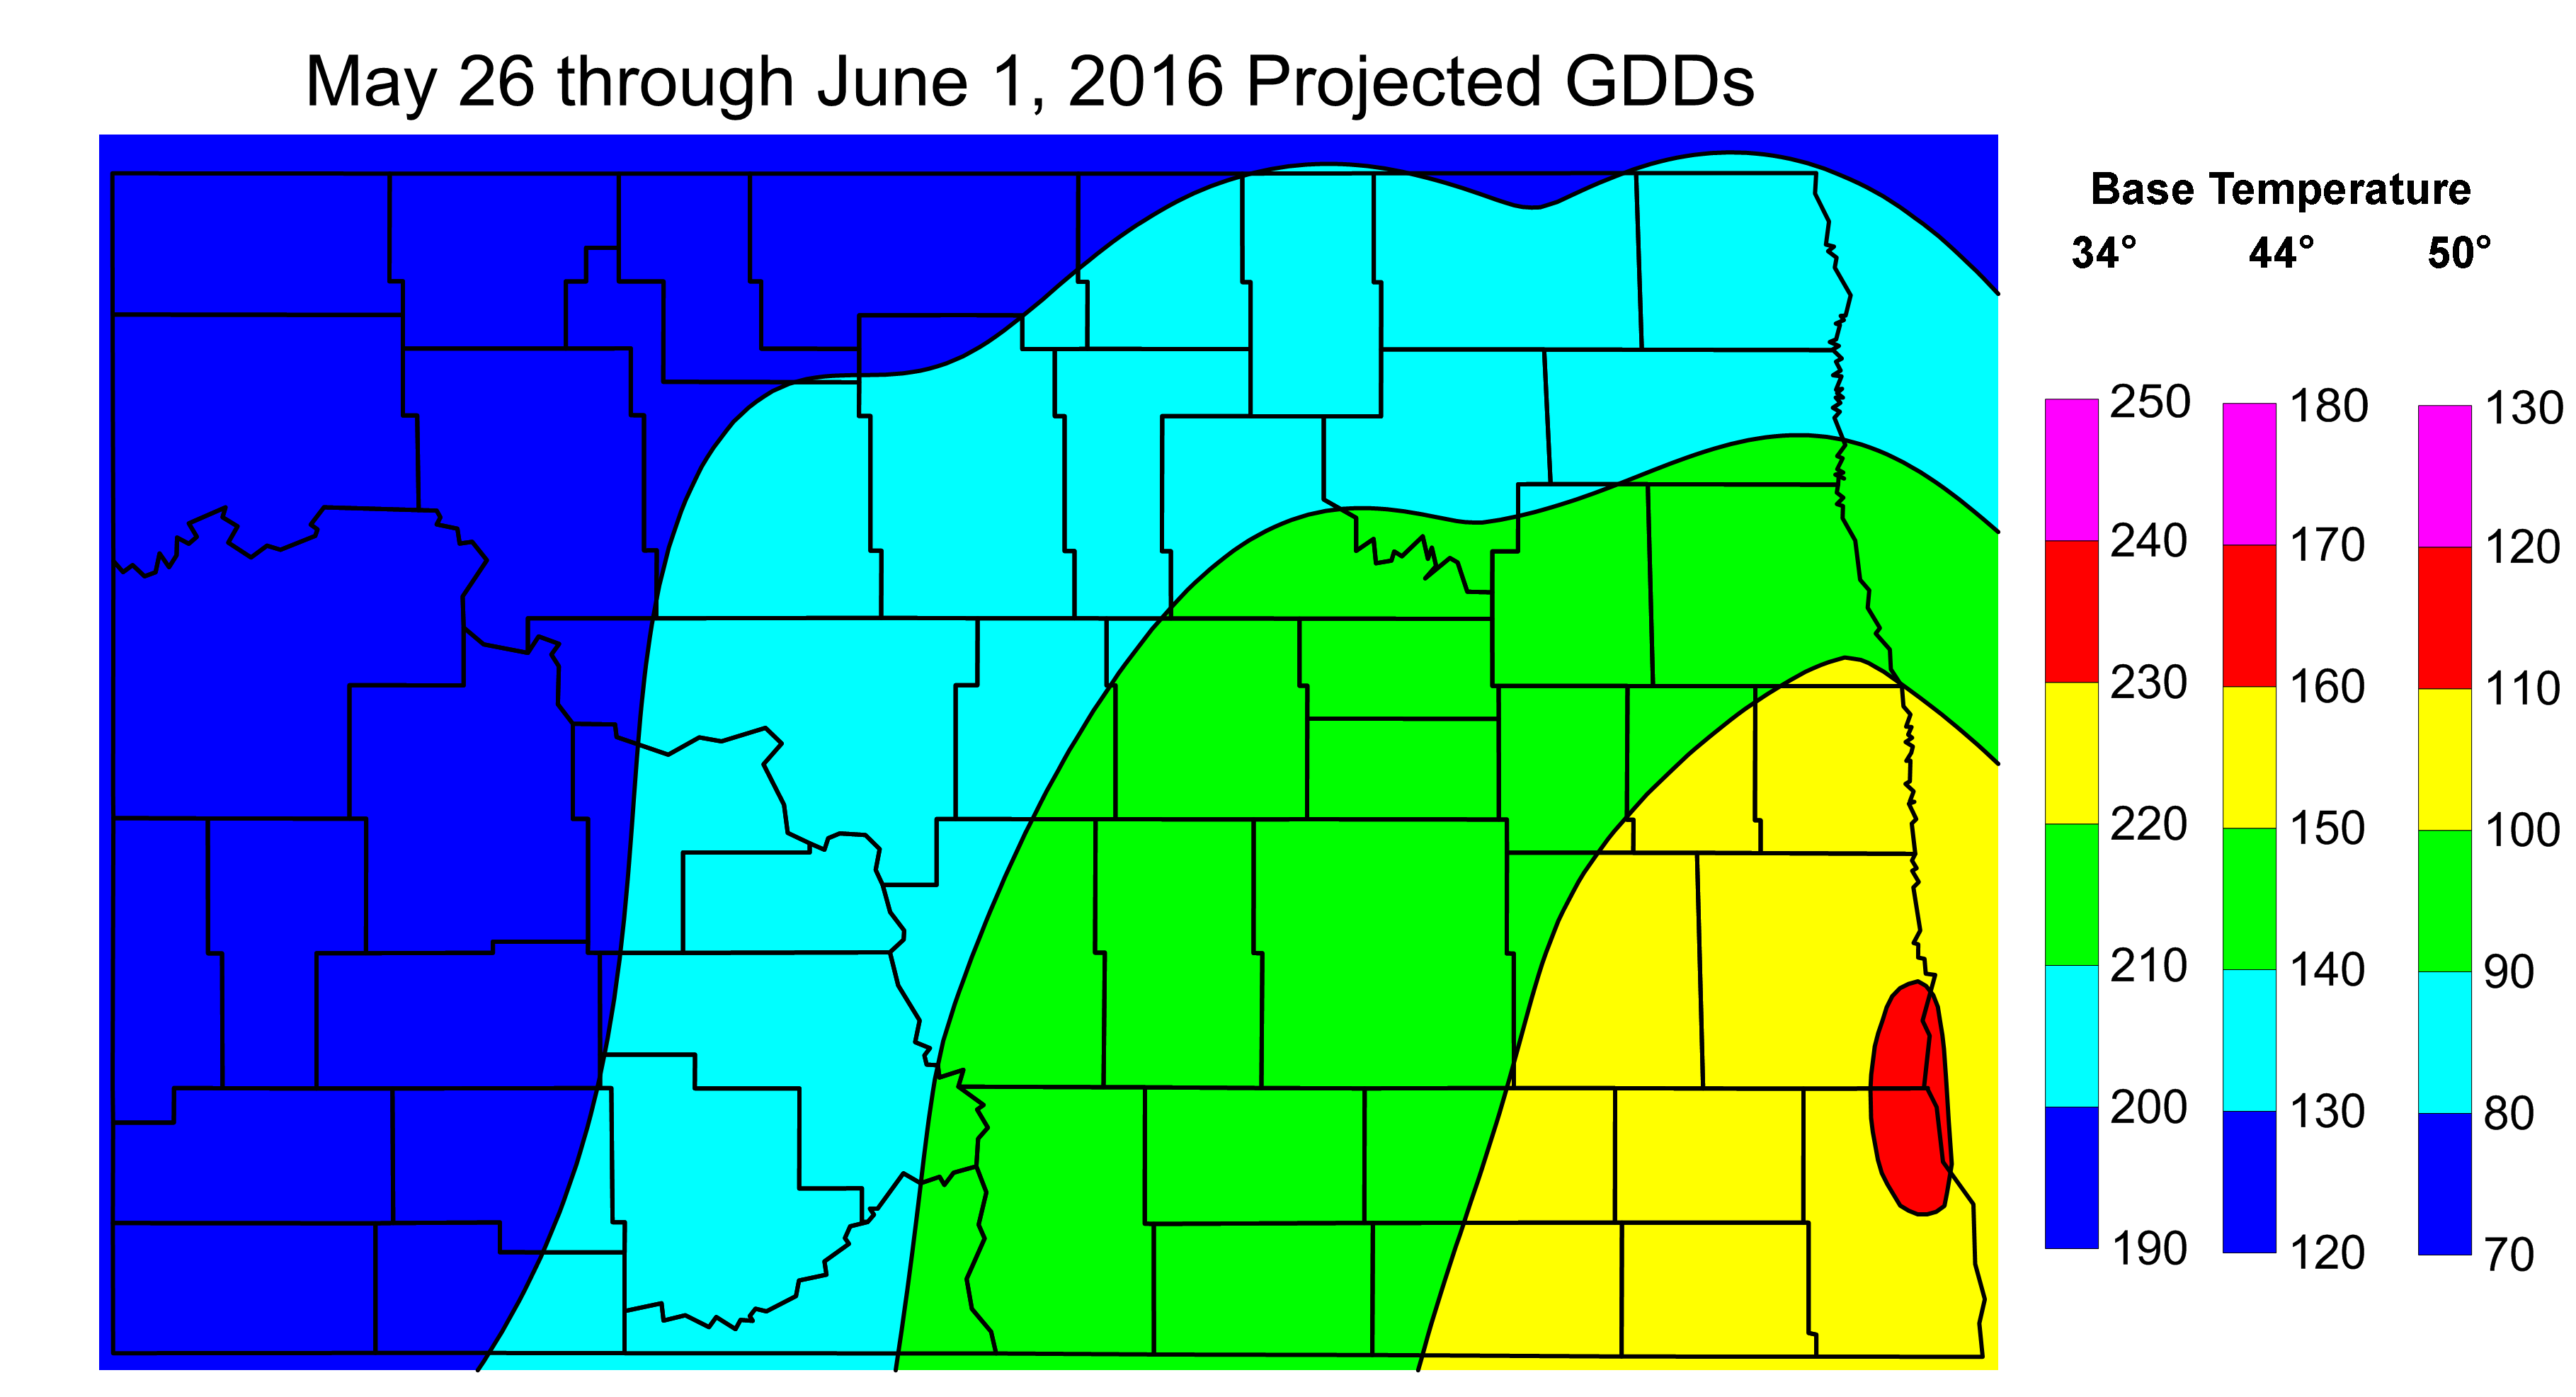 Figure 2. Projected Growing Degree Days from May 26 through June 1, 2016